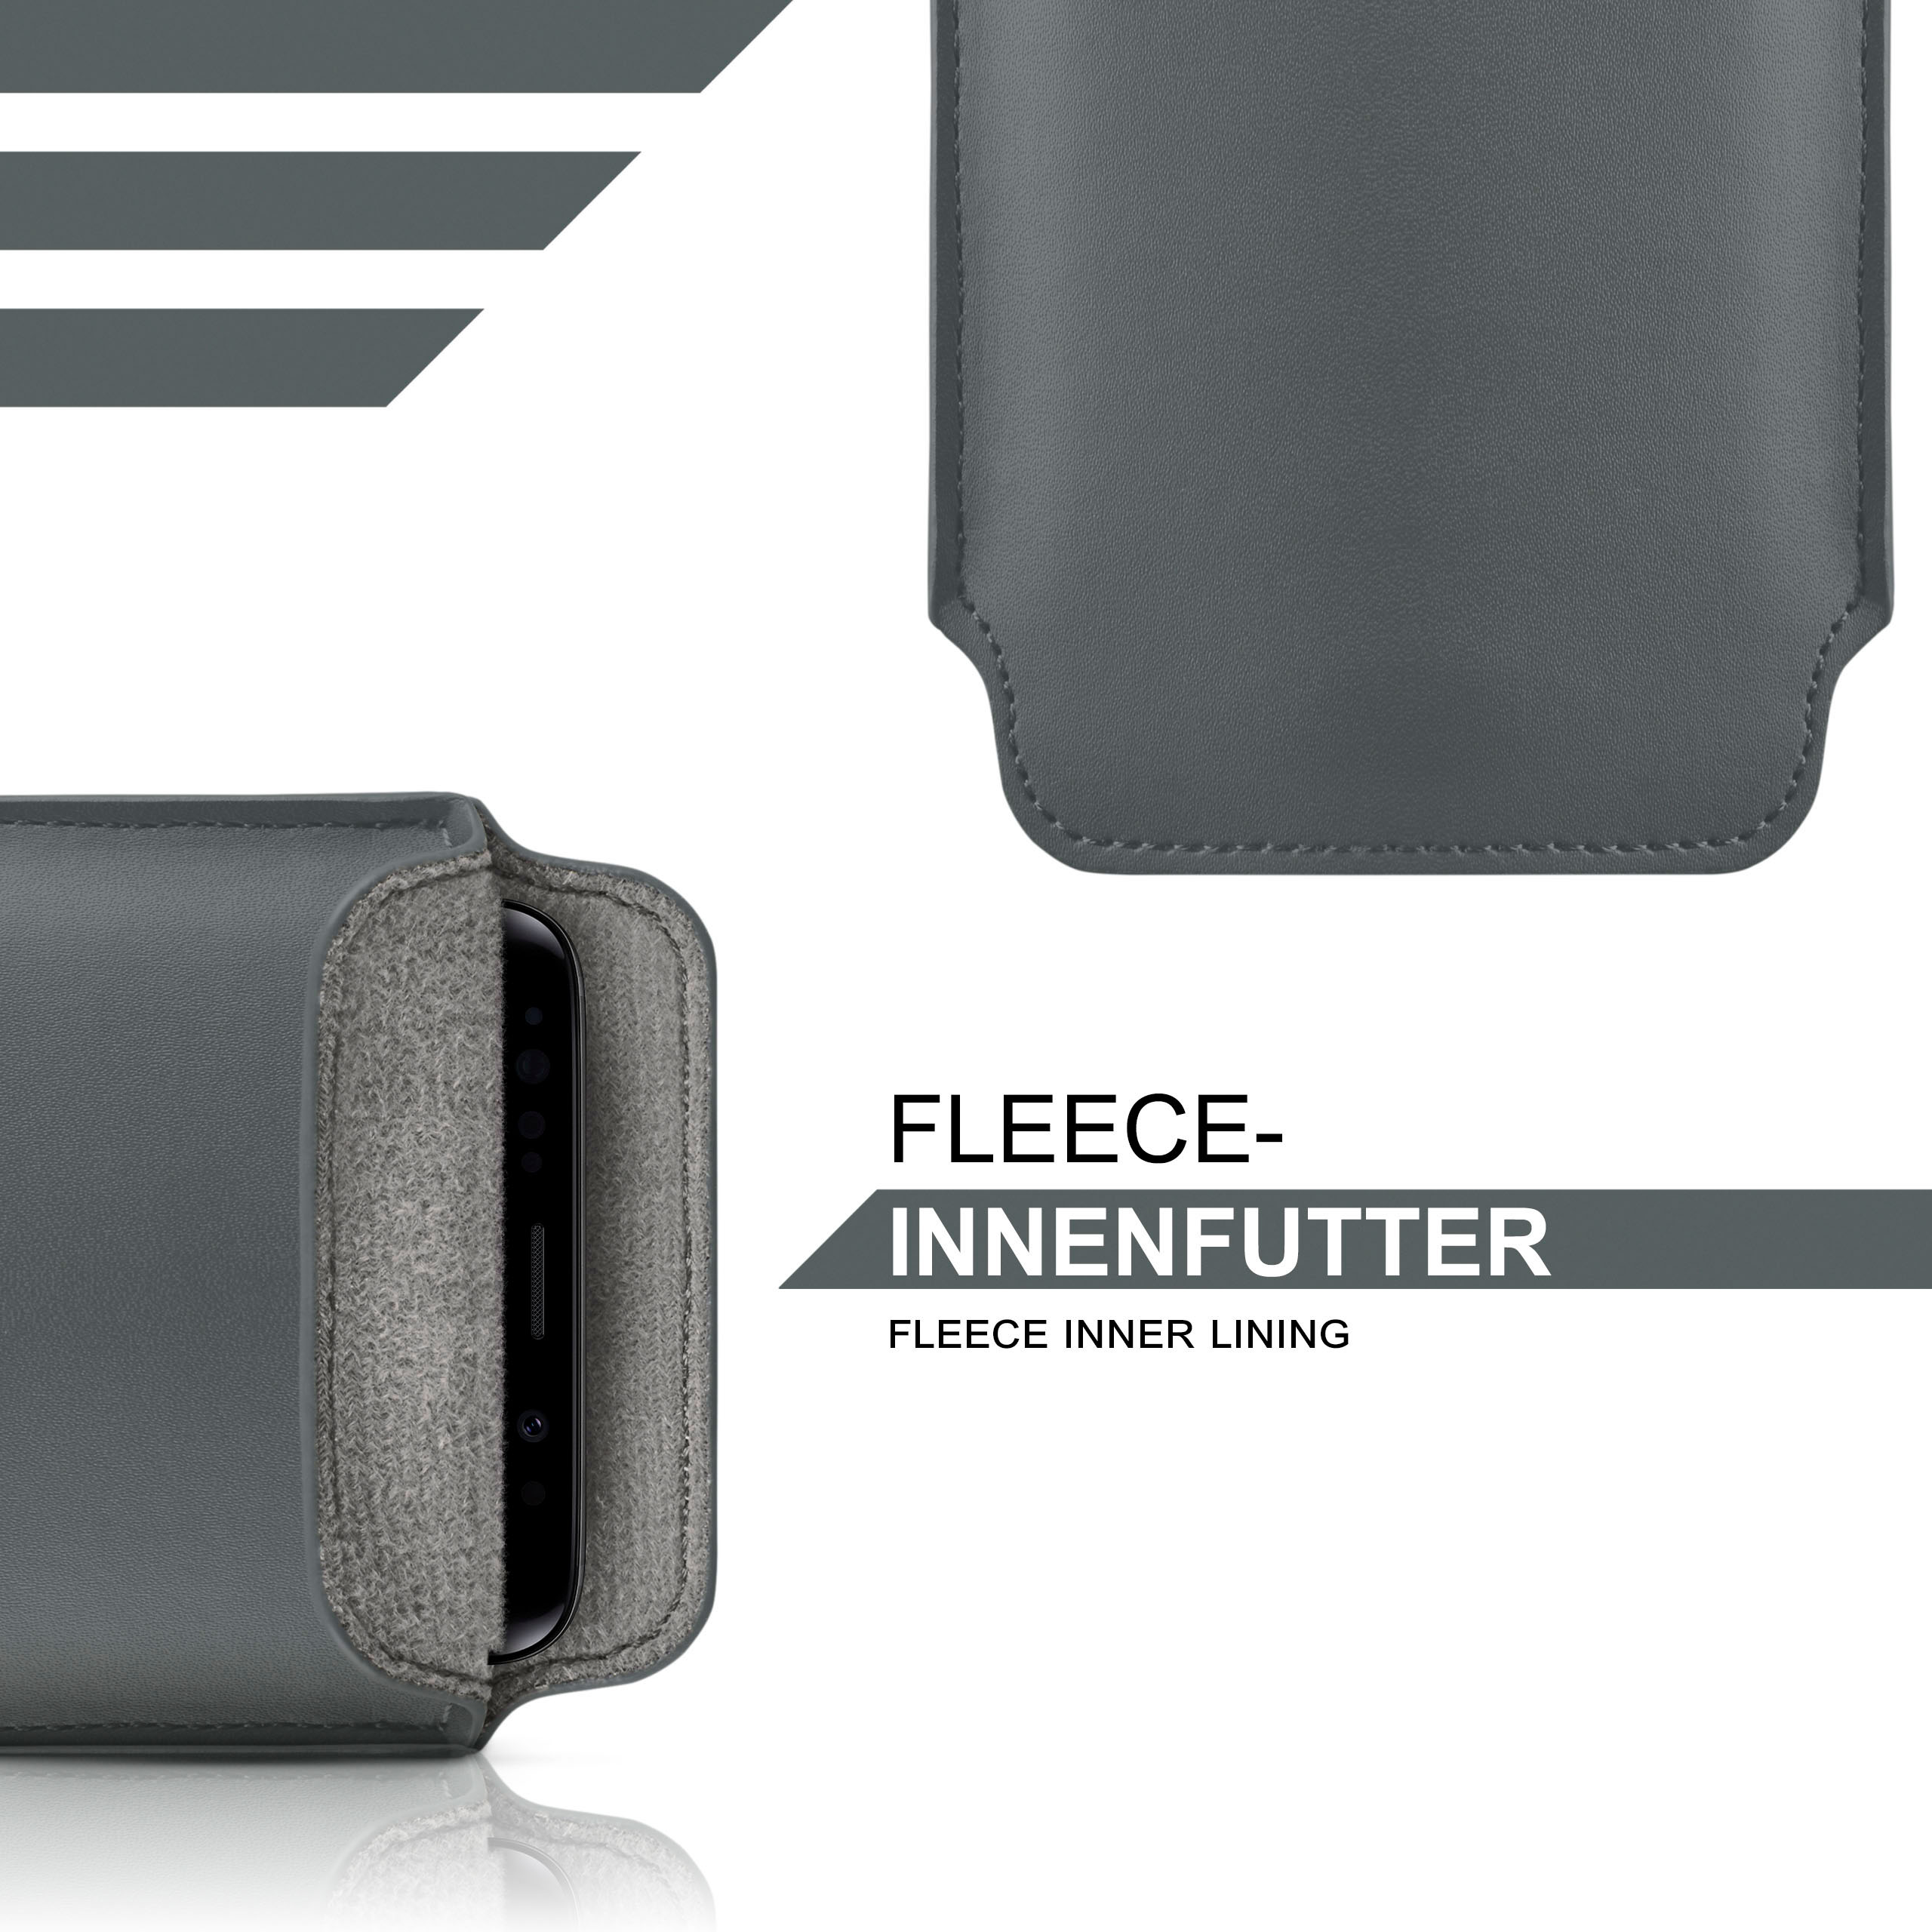 MOEX Slide Case, Full OnePlus, Anthracite-Gray 3T, Cover